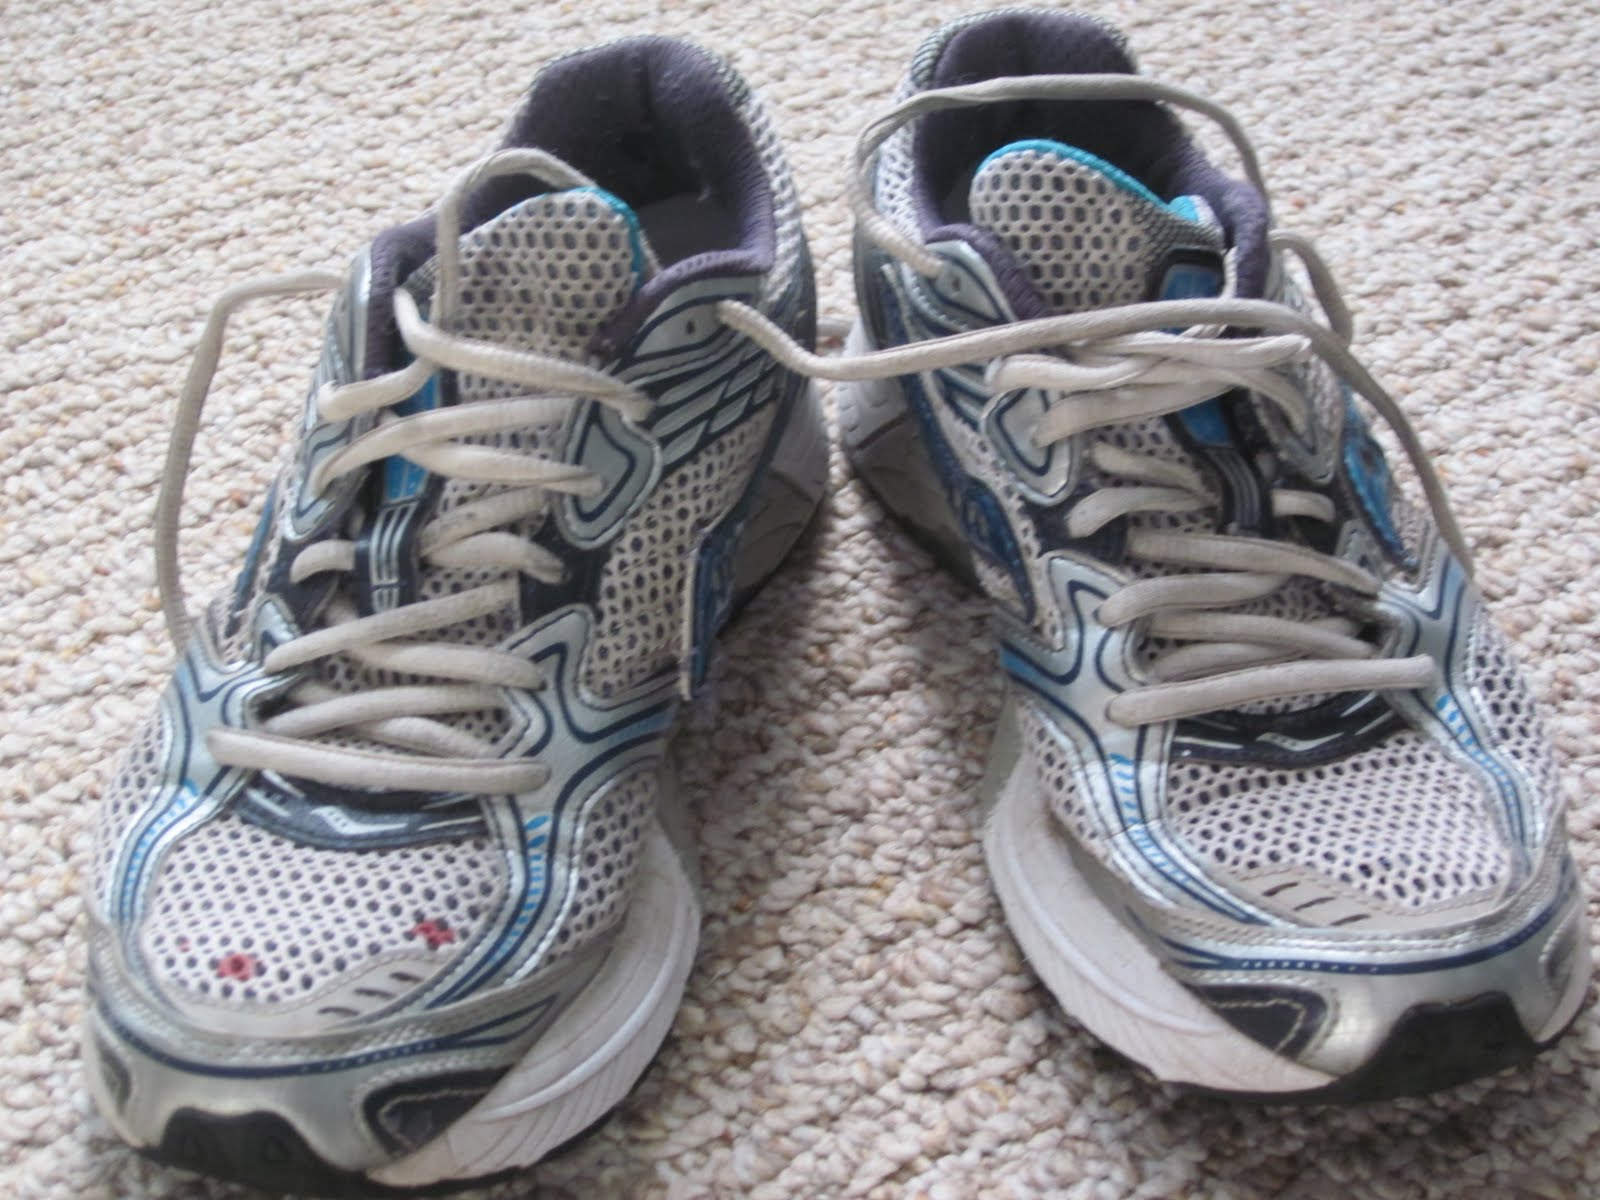 Mainely A Mom Running: And Ode to an old pair of shoes